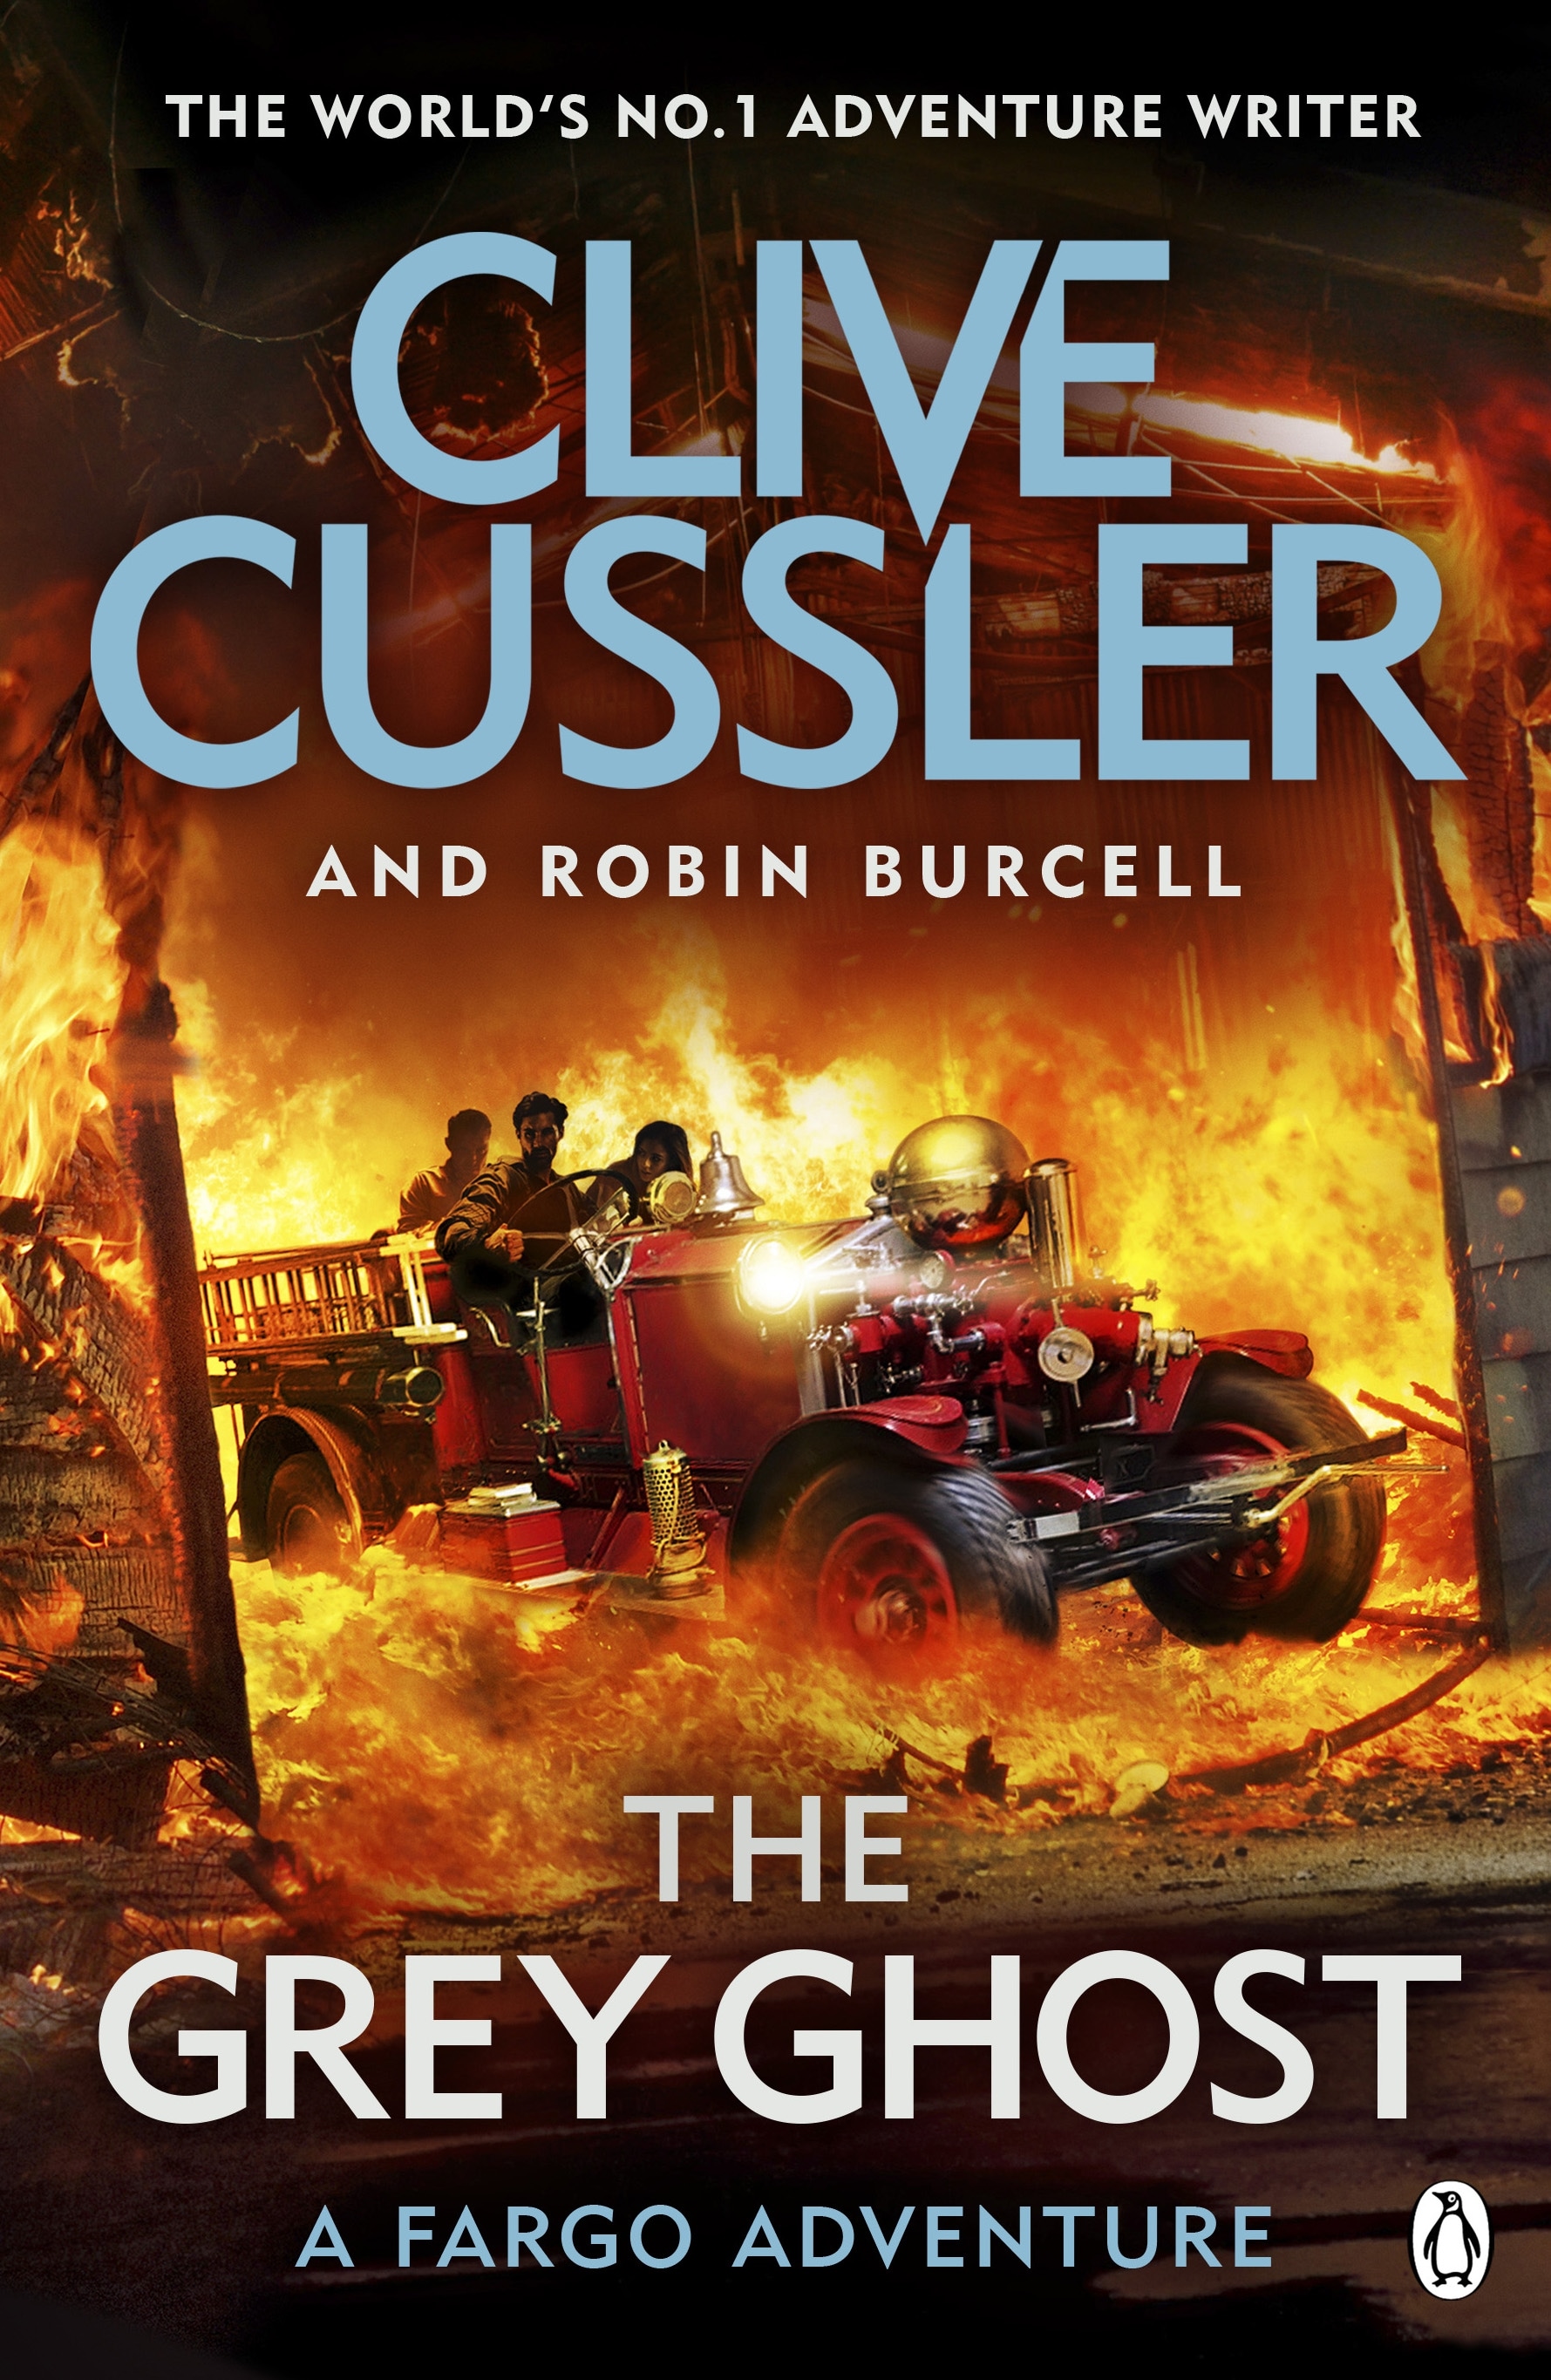 Book “The Grey Ghost” by Clive Cussler, Robin Burcell — June 13, 2019